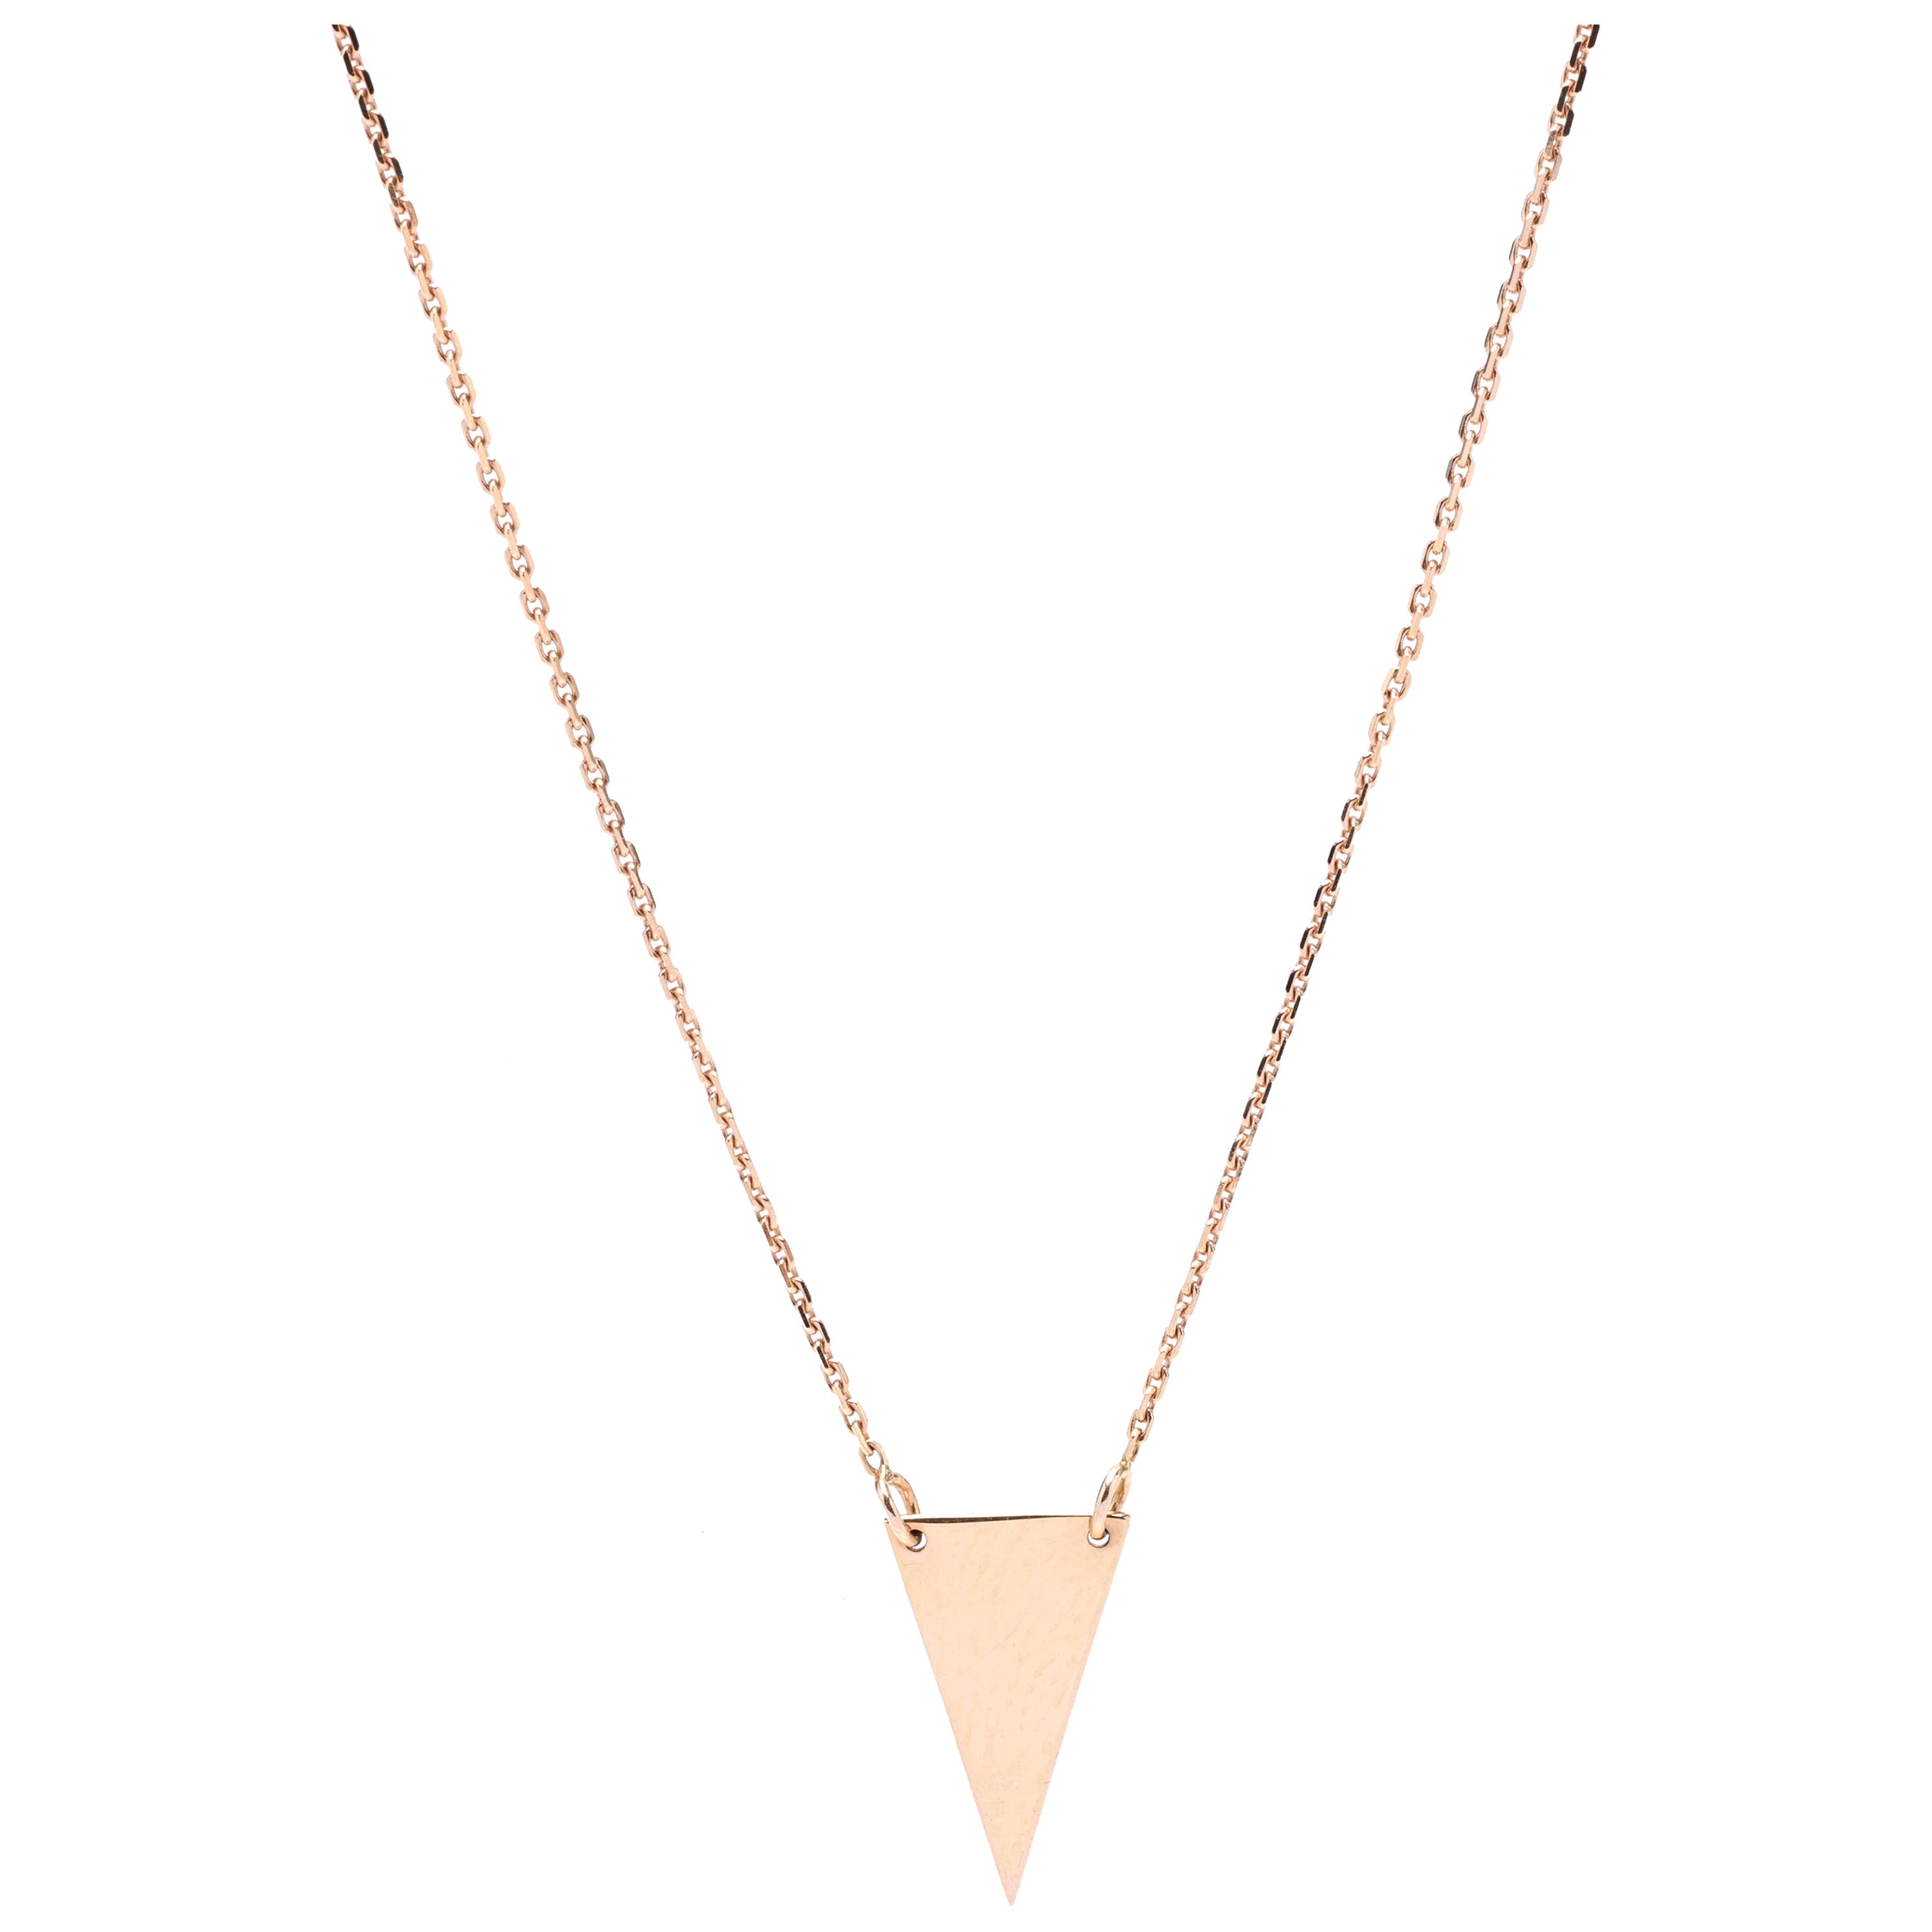 14K Rose Gold Triangle Necklace, Length 16-18 Inches, Pendant Necklace